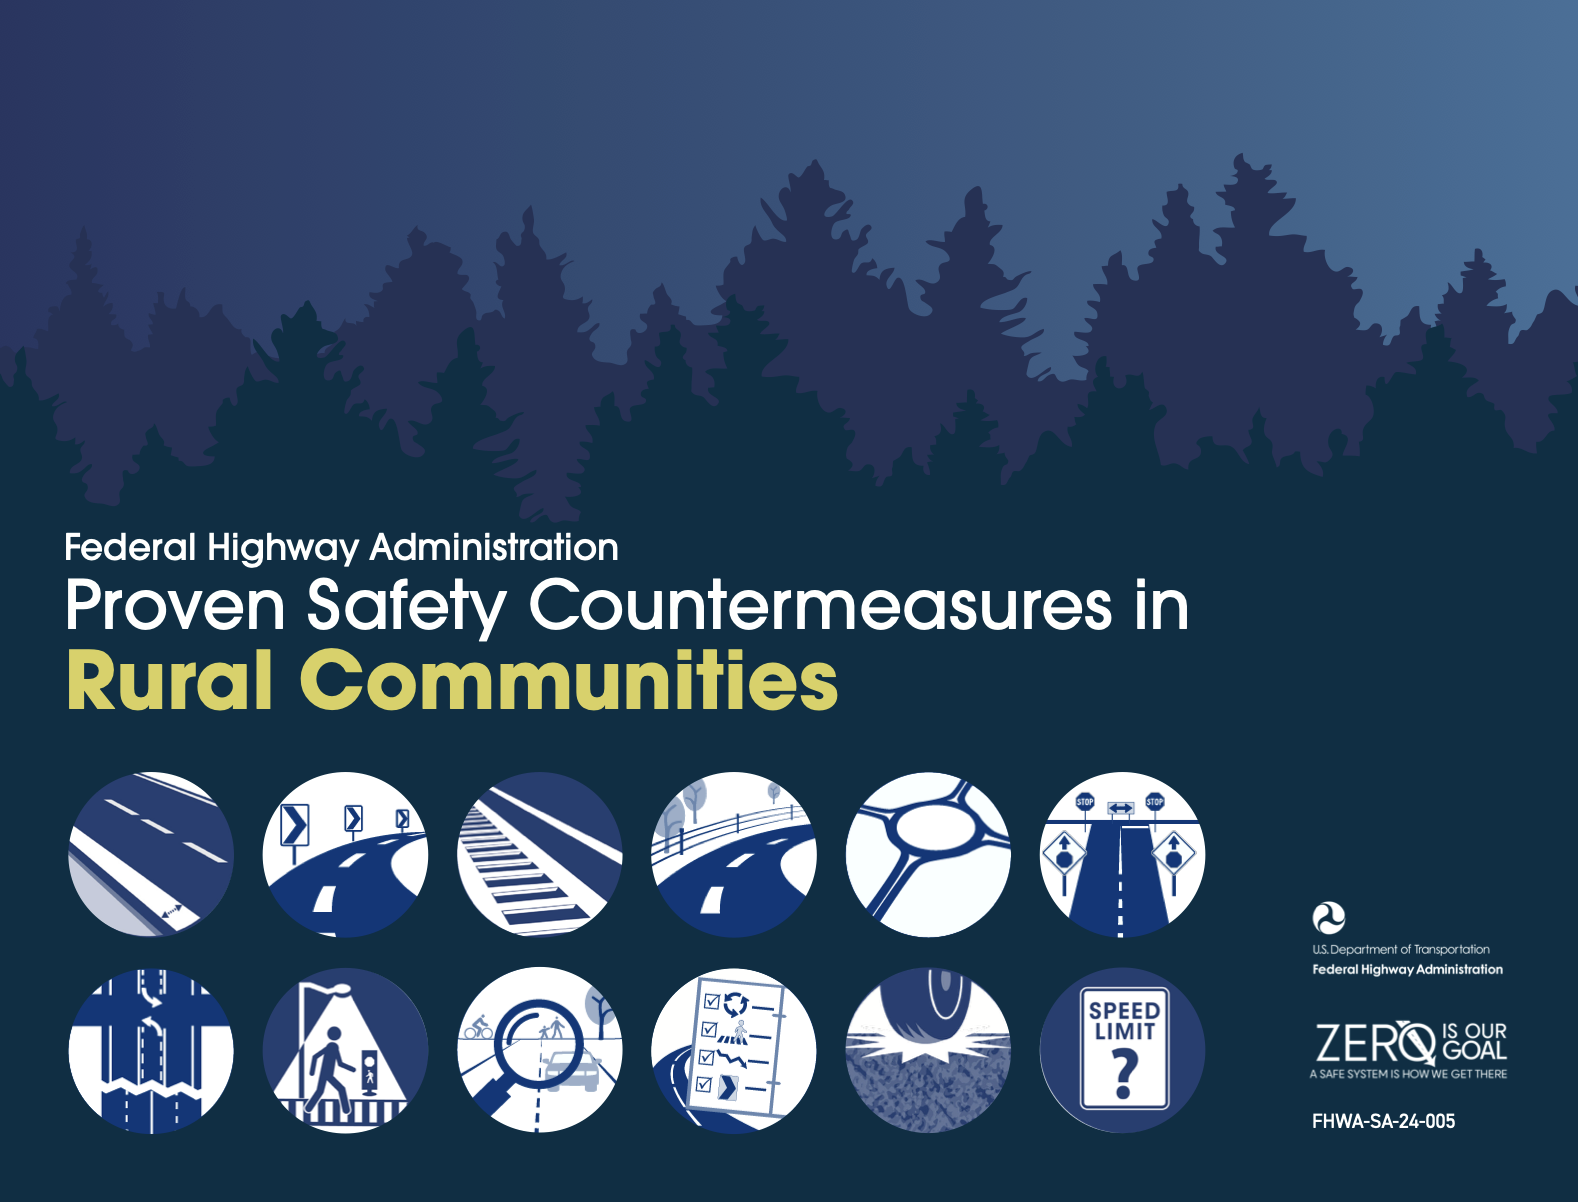 Explore the a new publication focusing on proven safety countermeasures for rural communities.